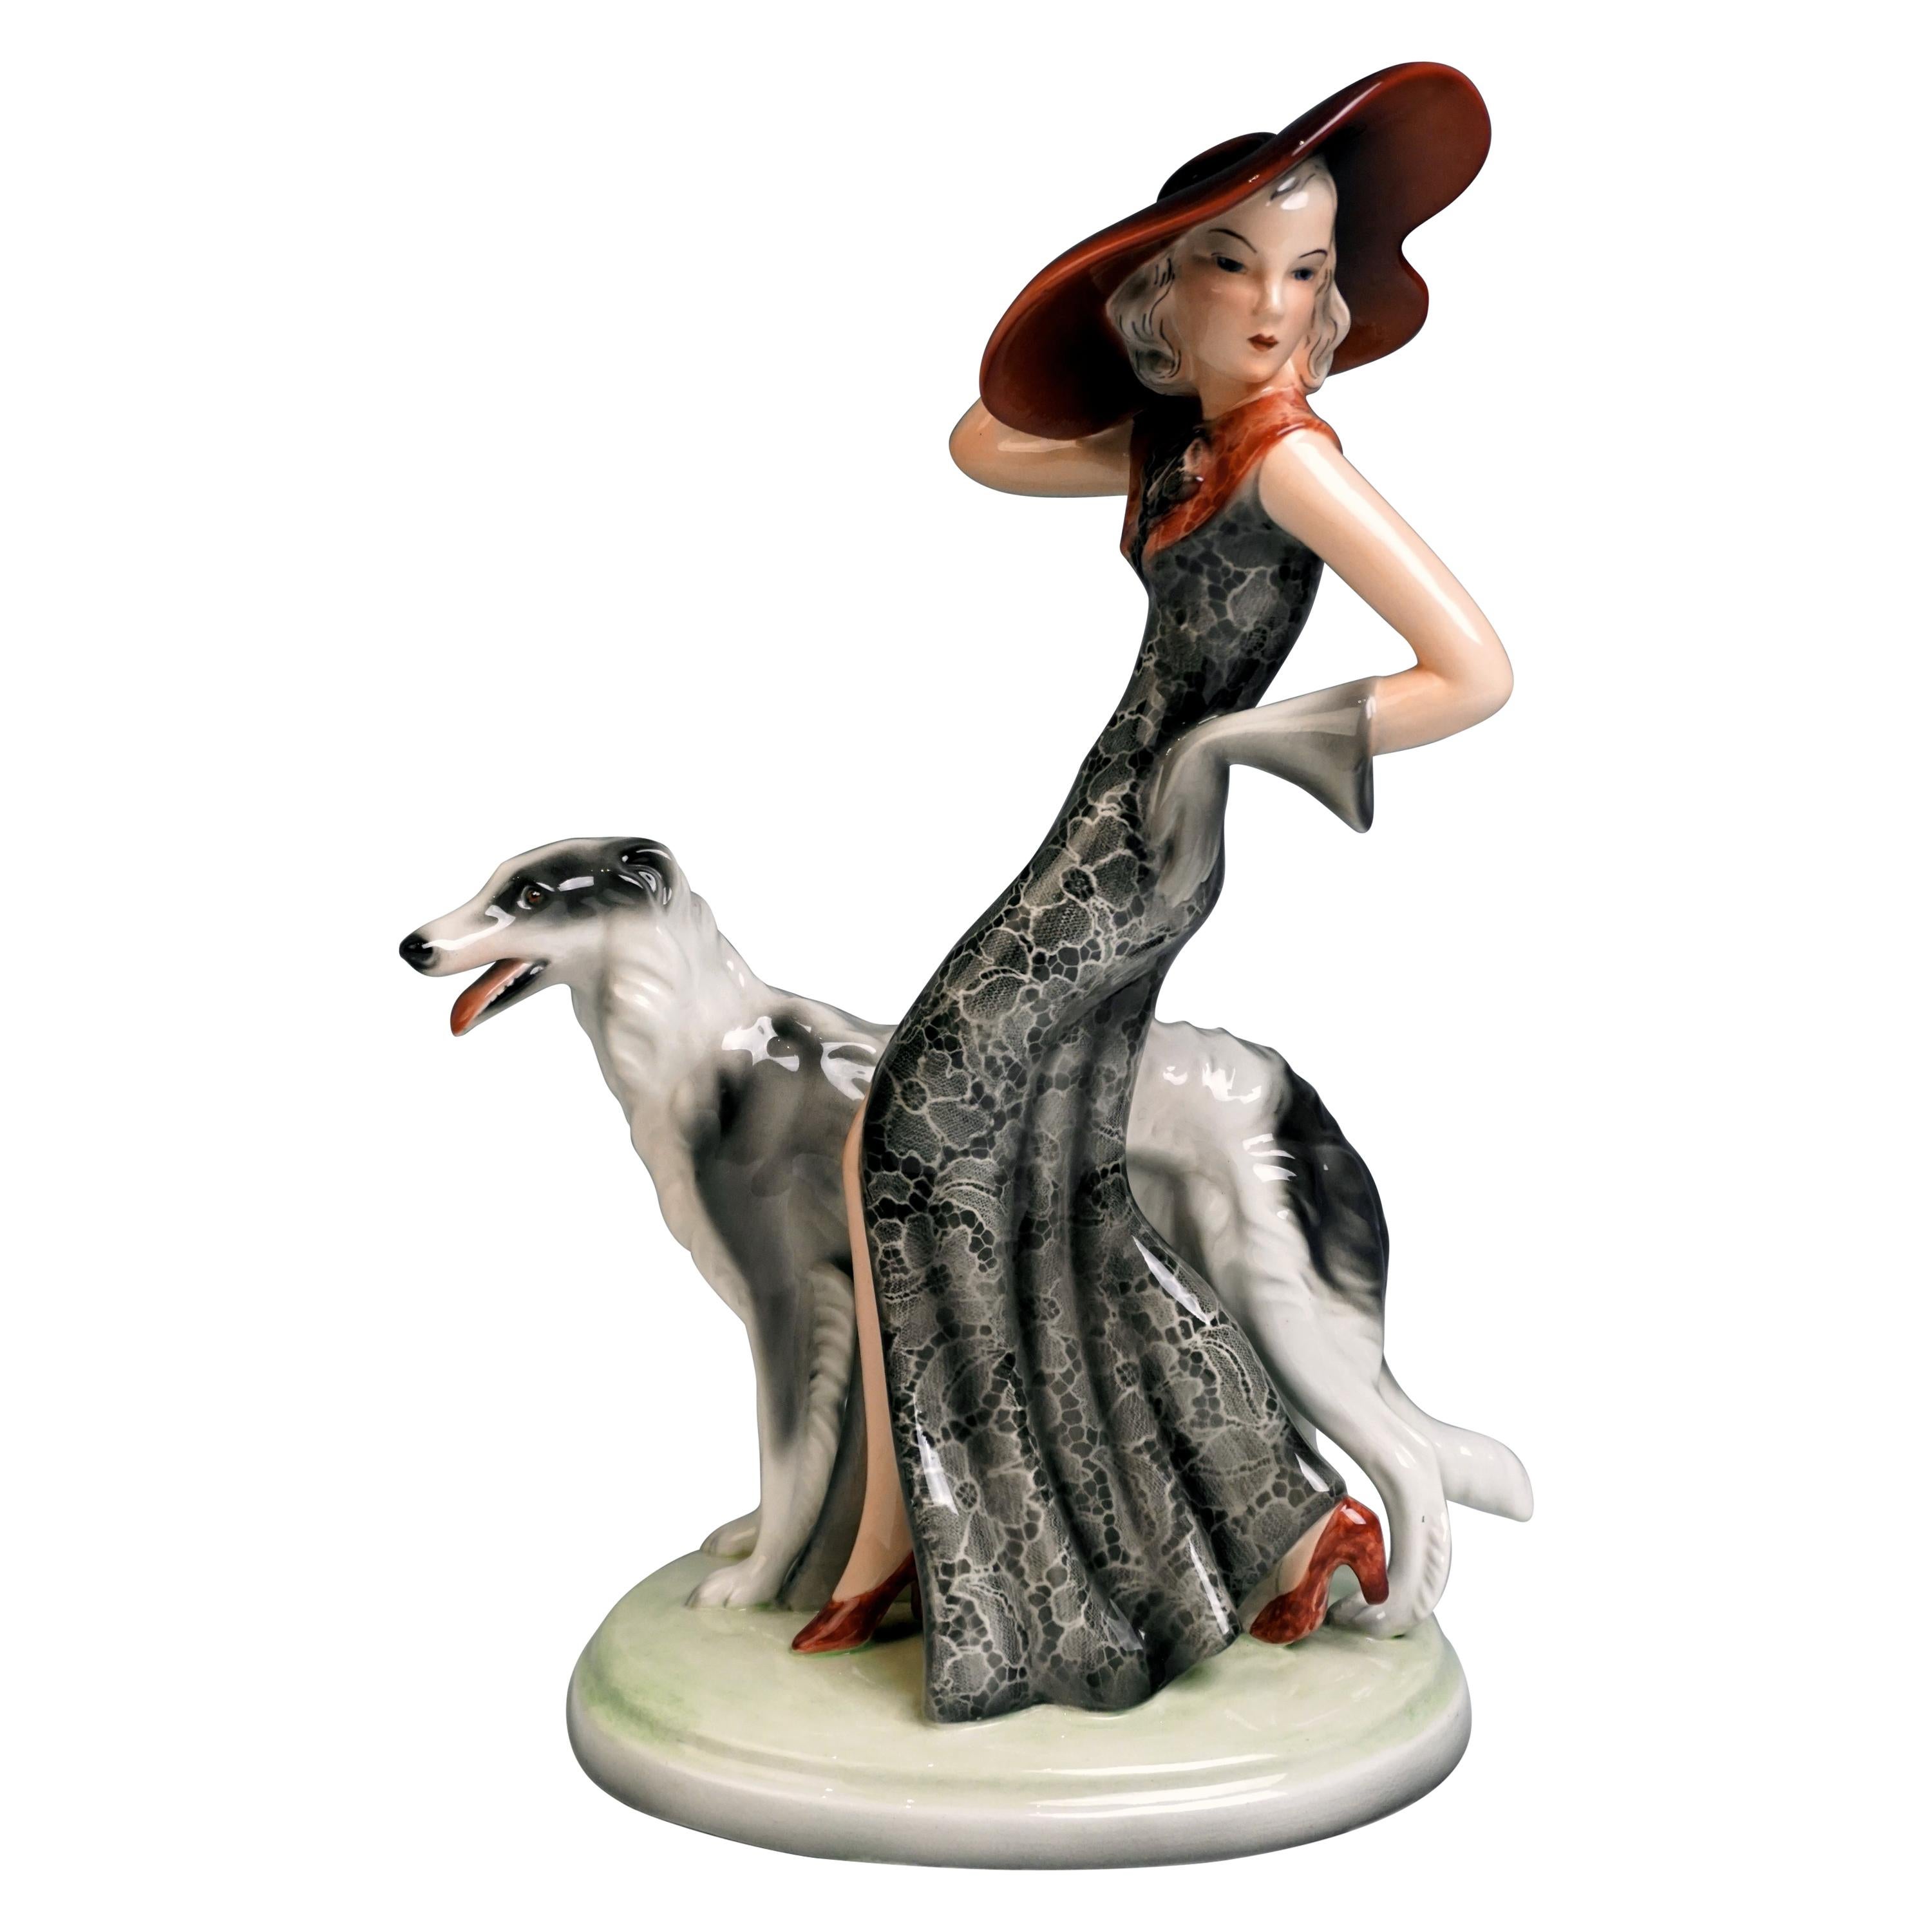 Goldscheider Figurine 'Masquerade' Lady with Barsoi by Claire Weiss, circa 1939